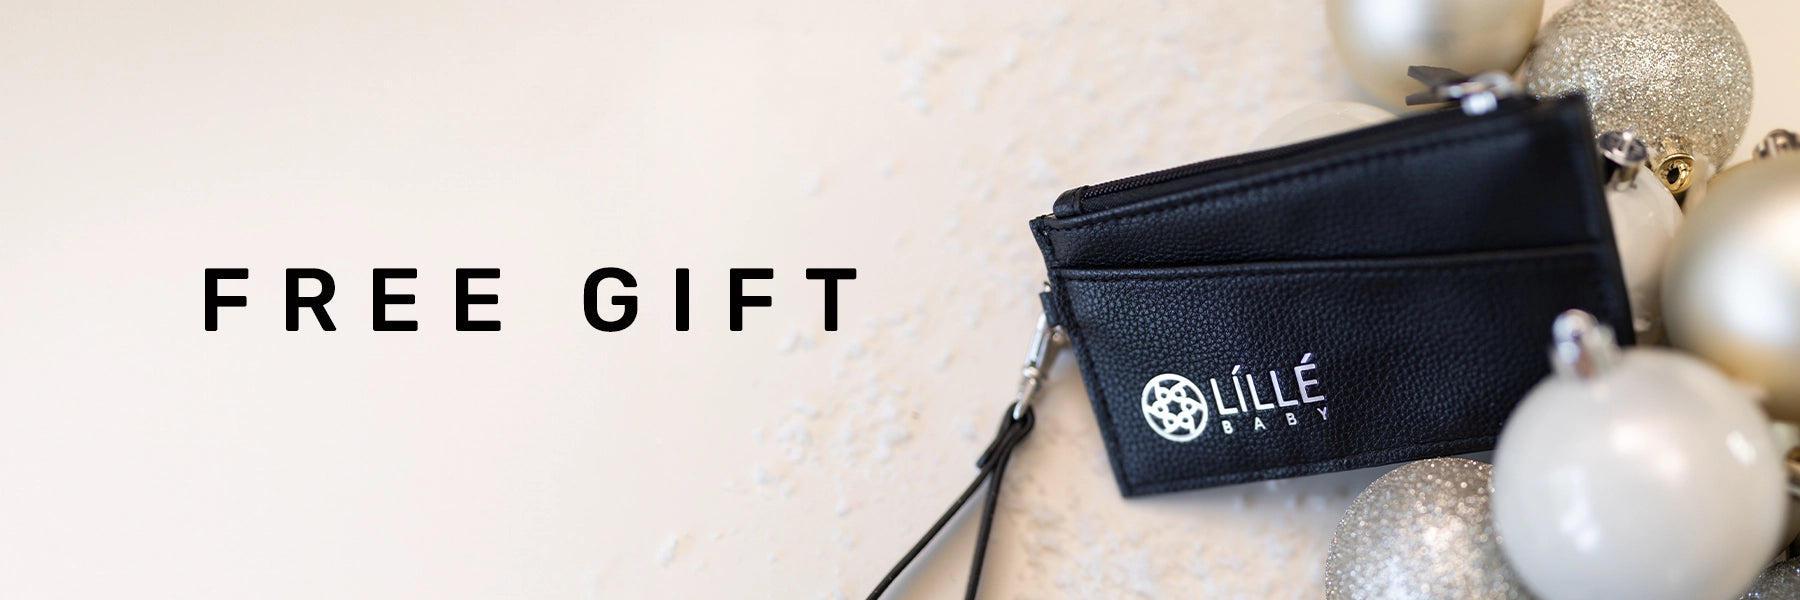 free wristlet wallet on orders over $49